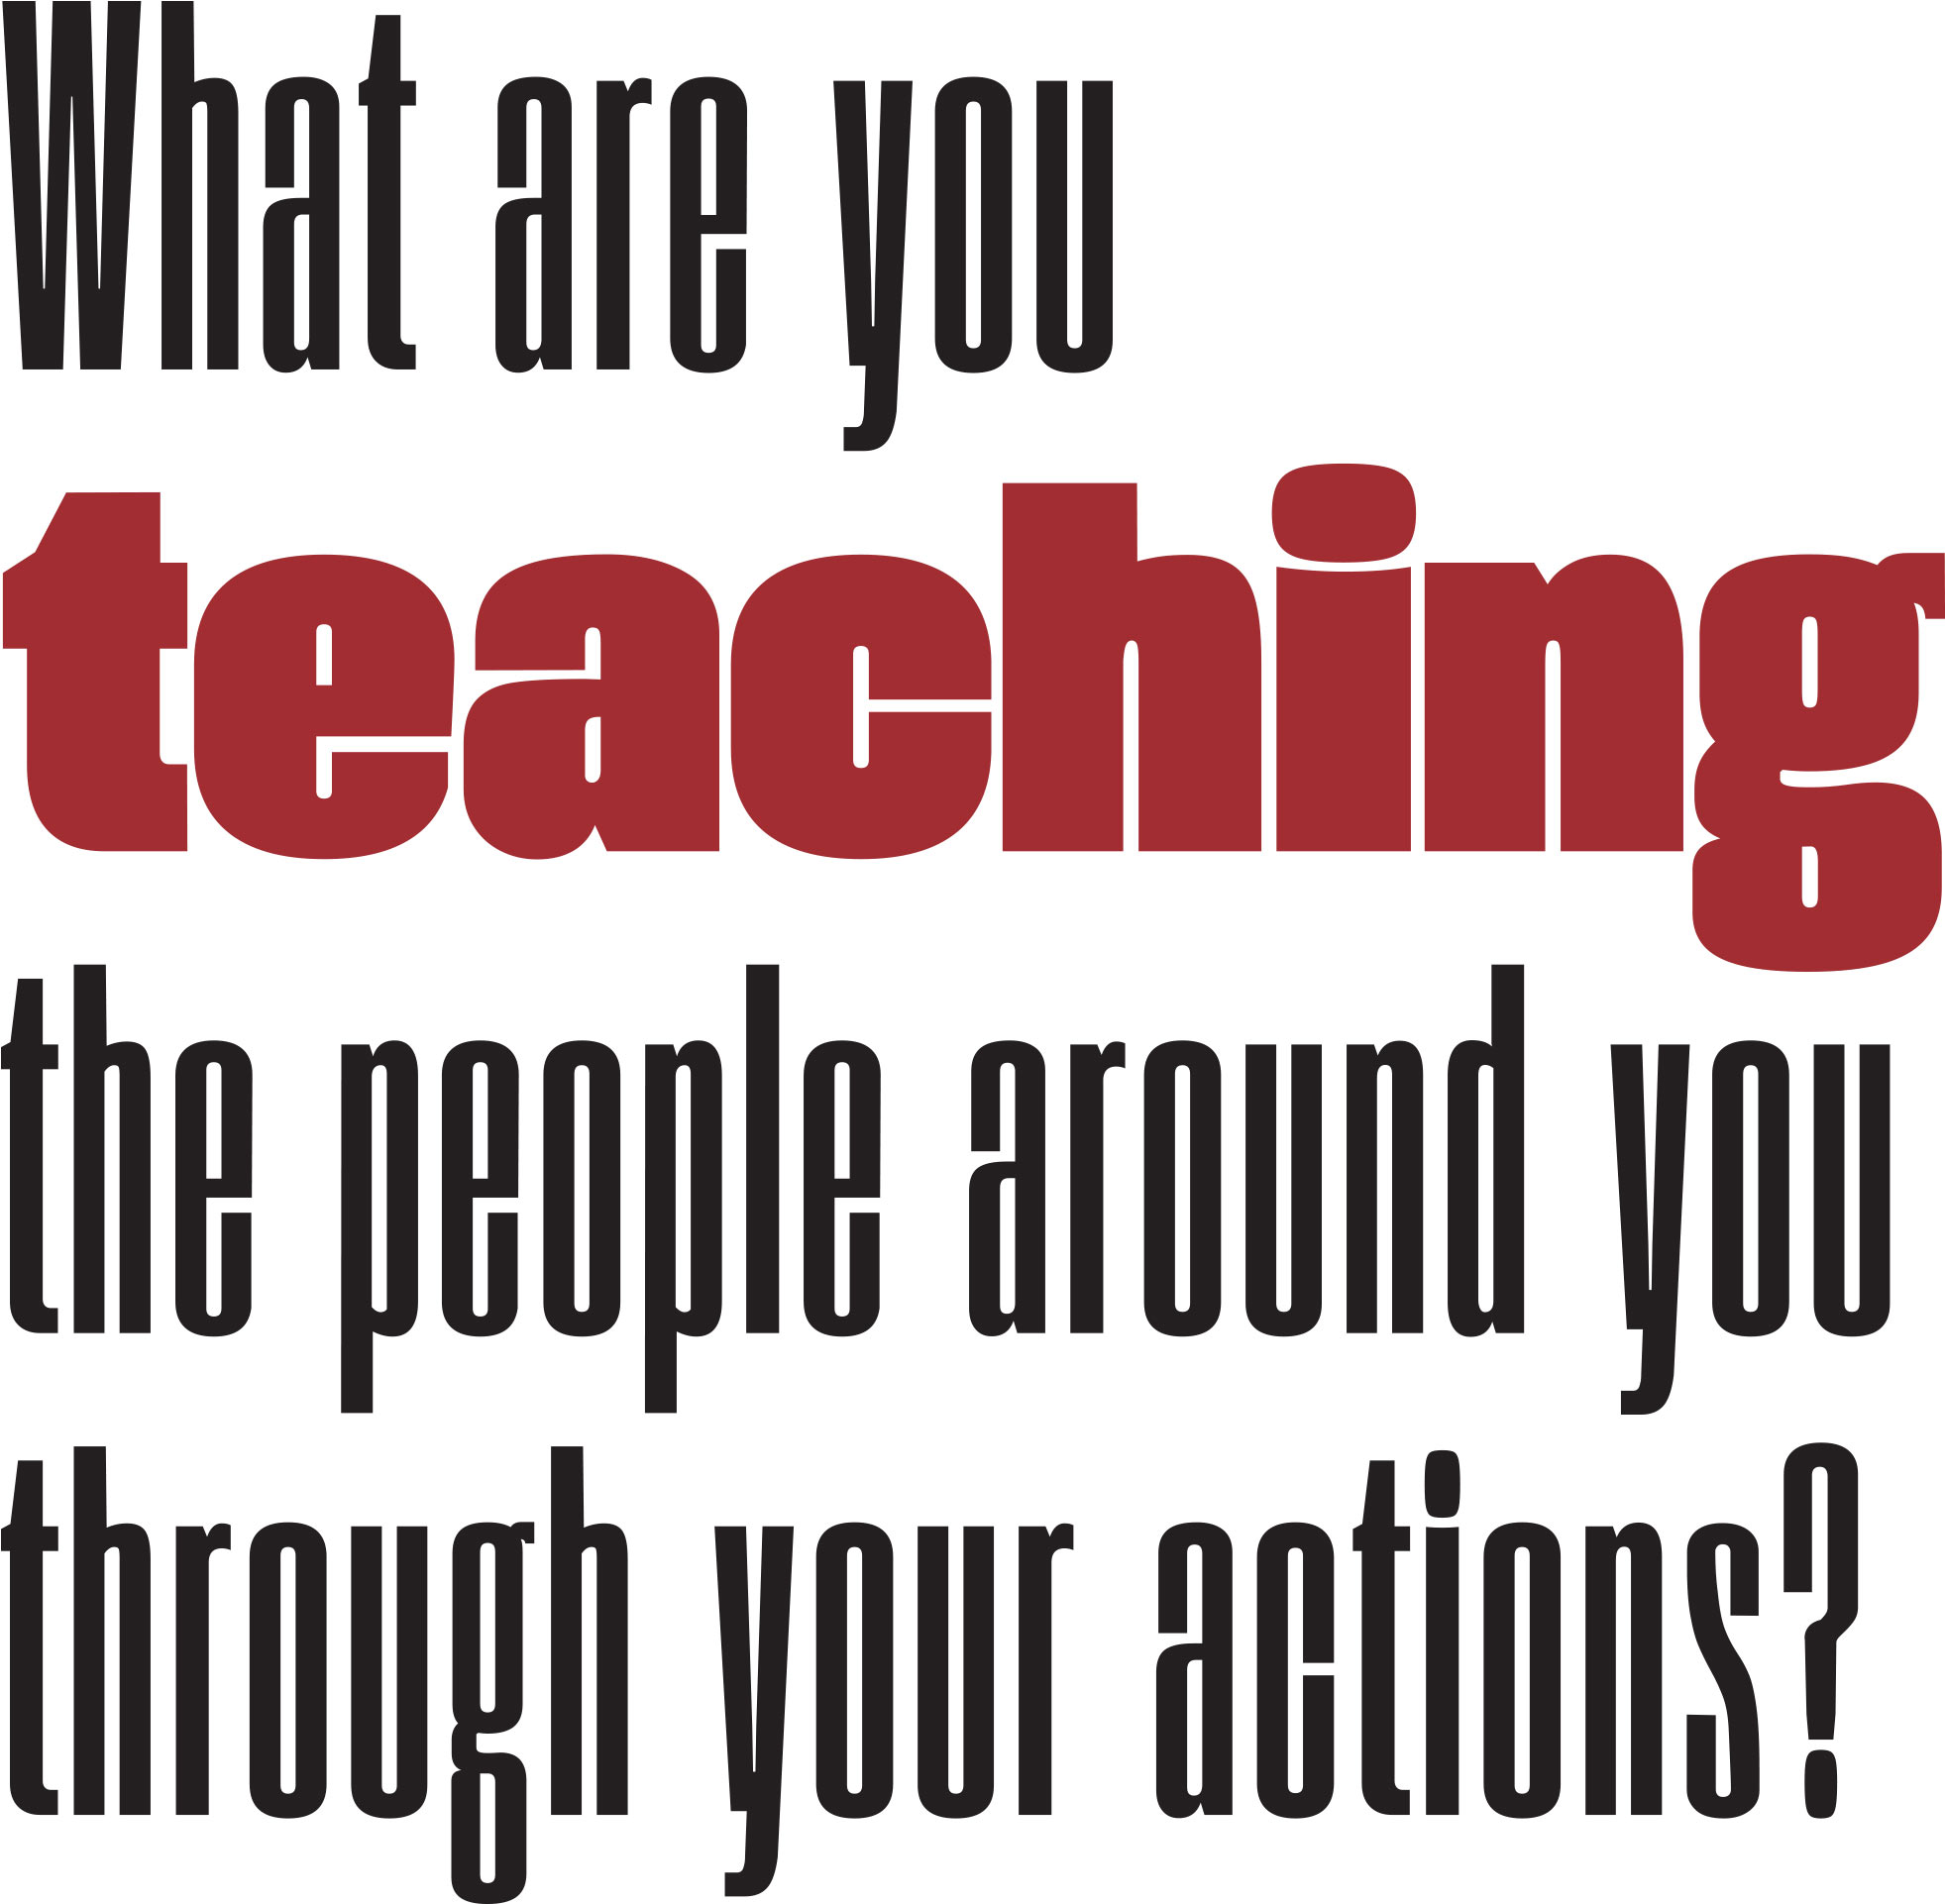 What are you teaching the people around you through your actions? quote typography